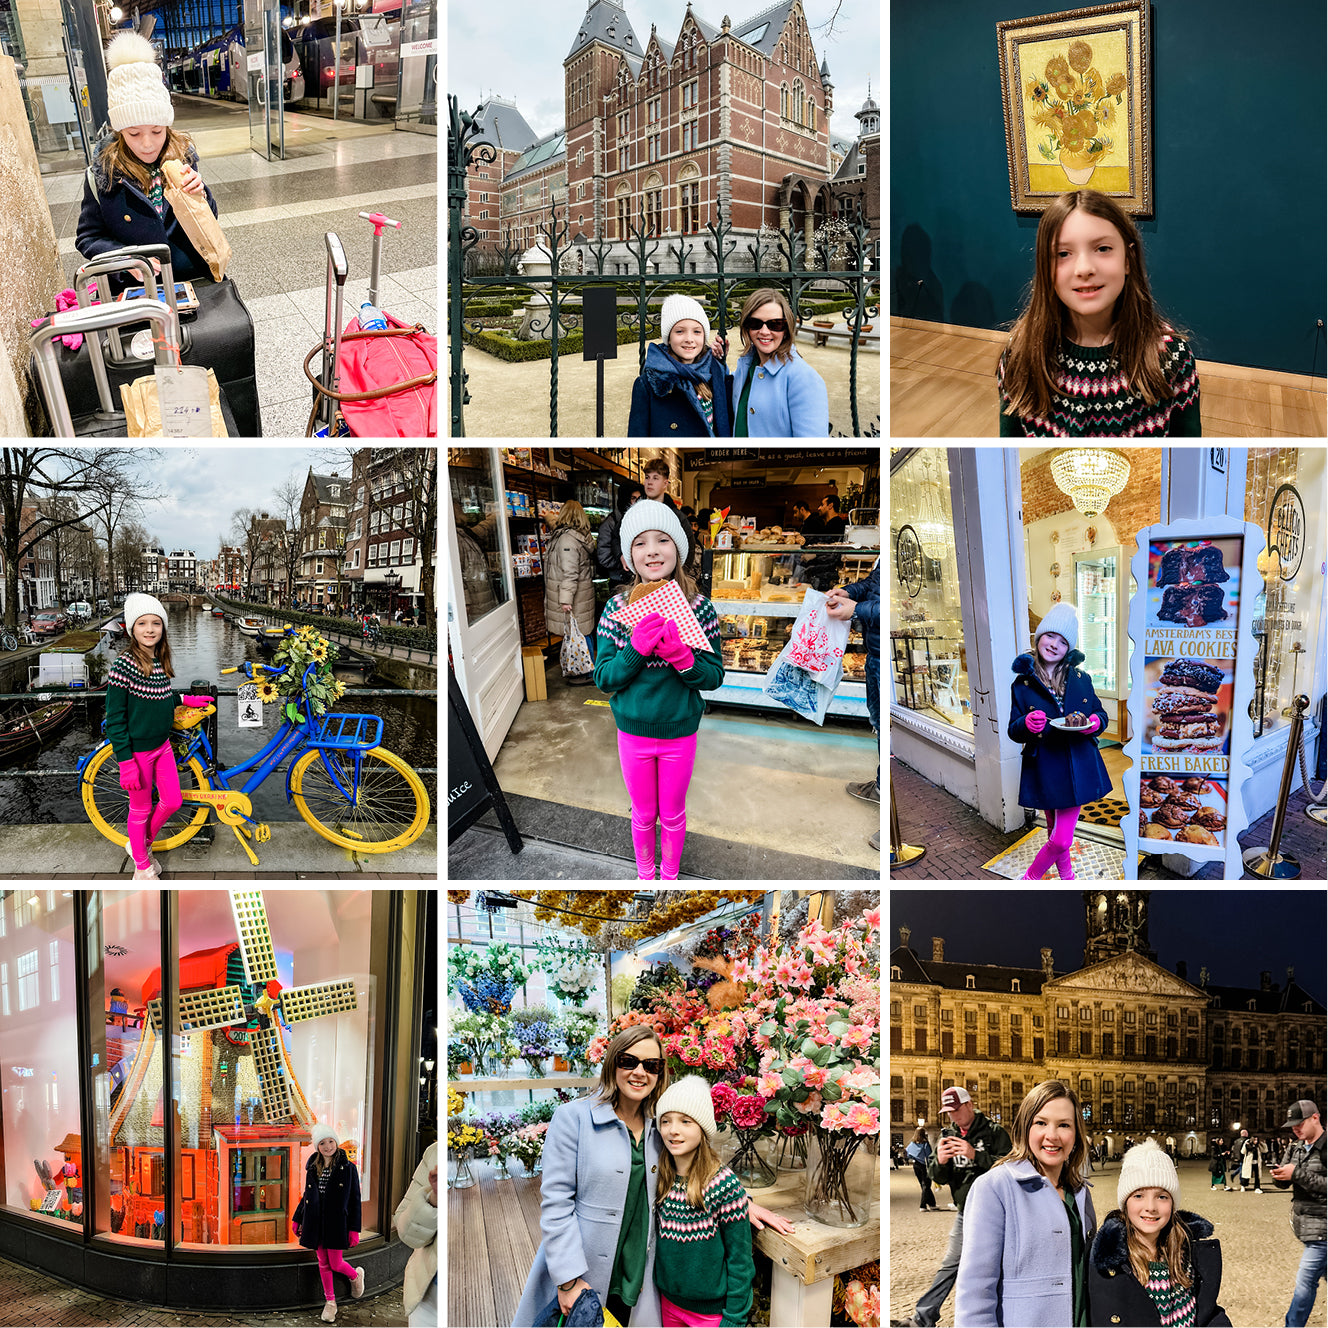 Amsterdam, Netherlands - Train Station from Paris to Amsterdam, Rijksmuseum, Van Gogh Museum, the canals, Stroopwafel, windmill out of legos, flower market, Rembrandtplein